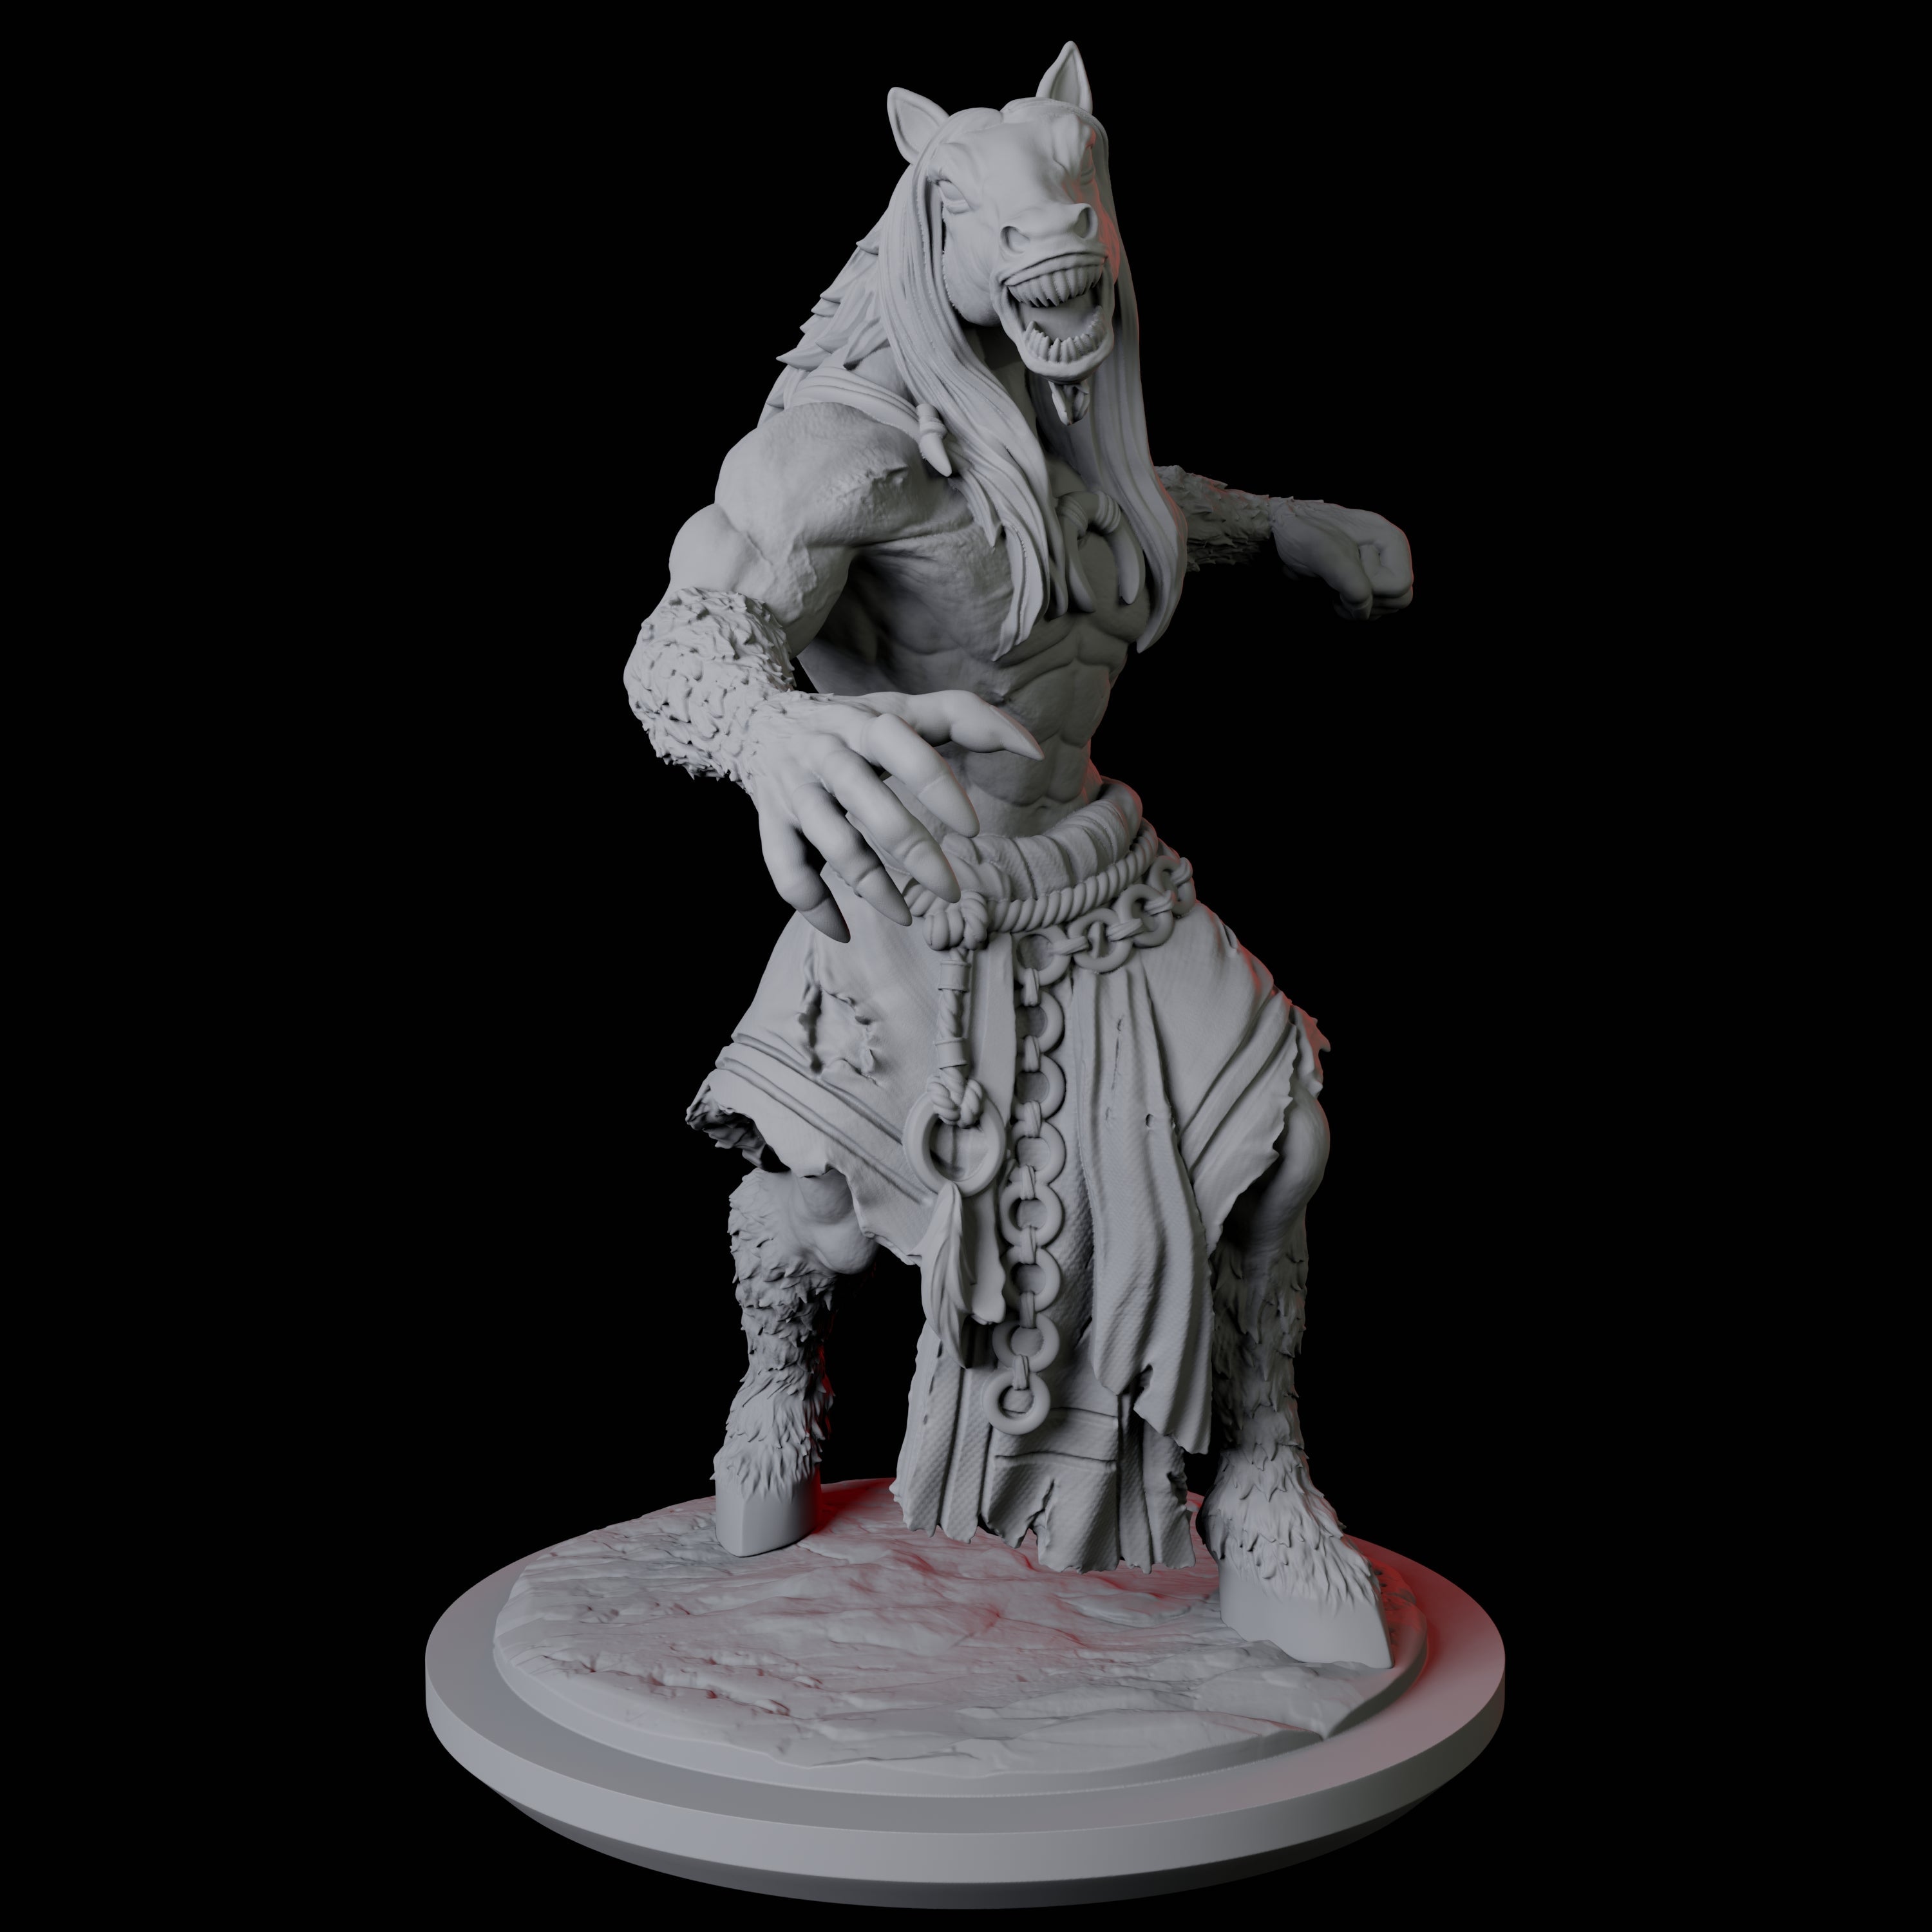 Three Neighing Reverse Centaurs Miniature for Dungeons and Dragons, Pathfinder or other TTRPGs